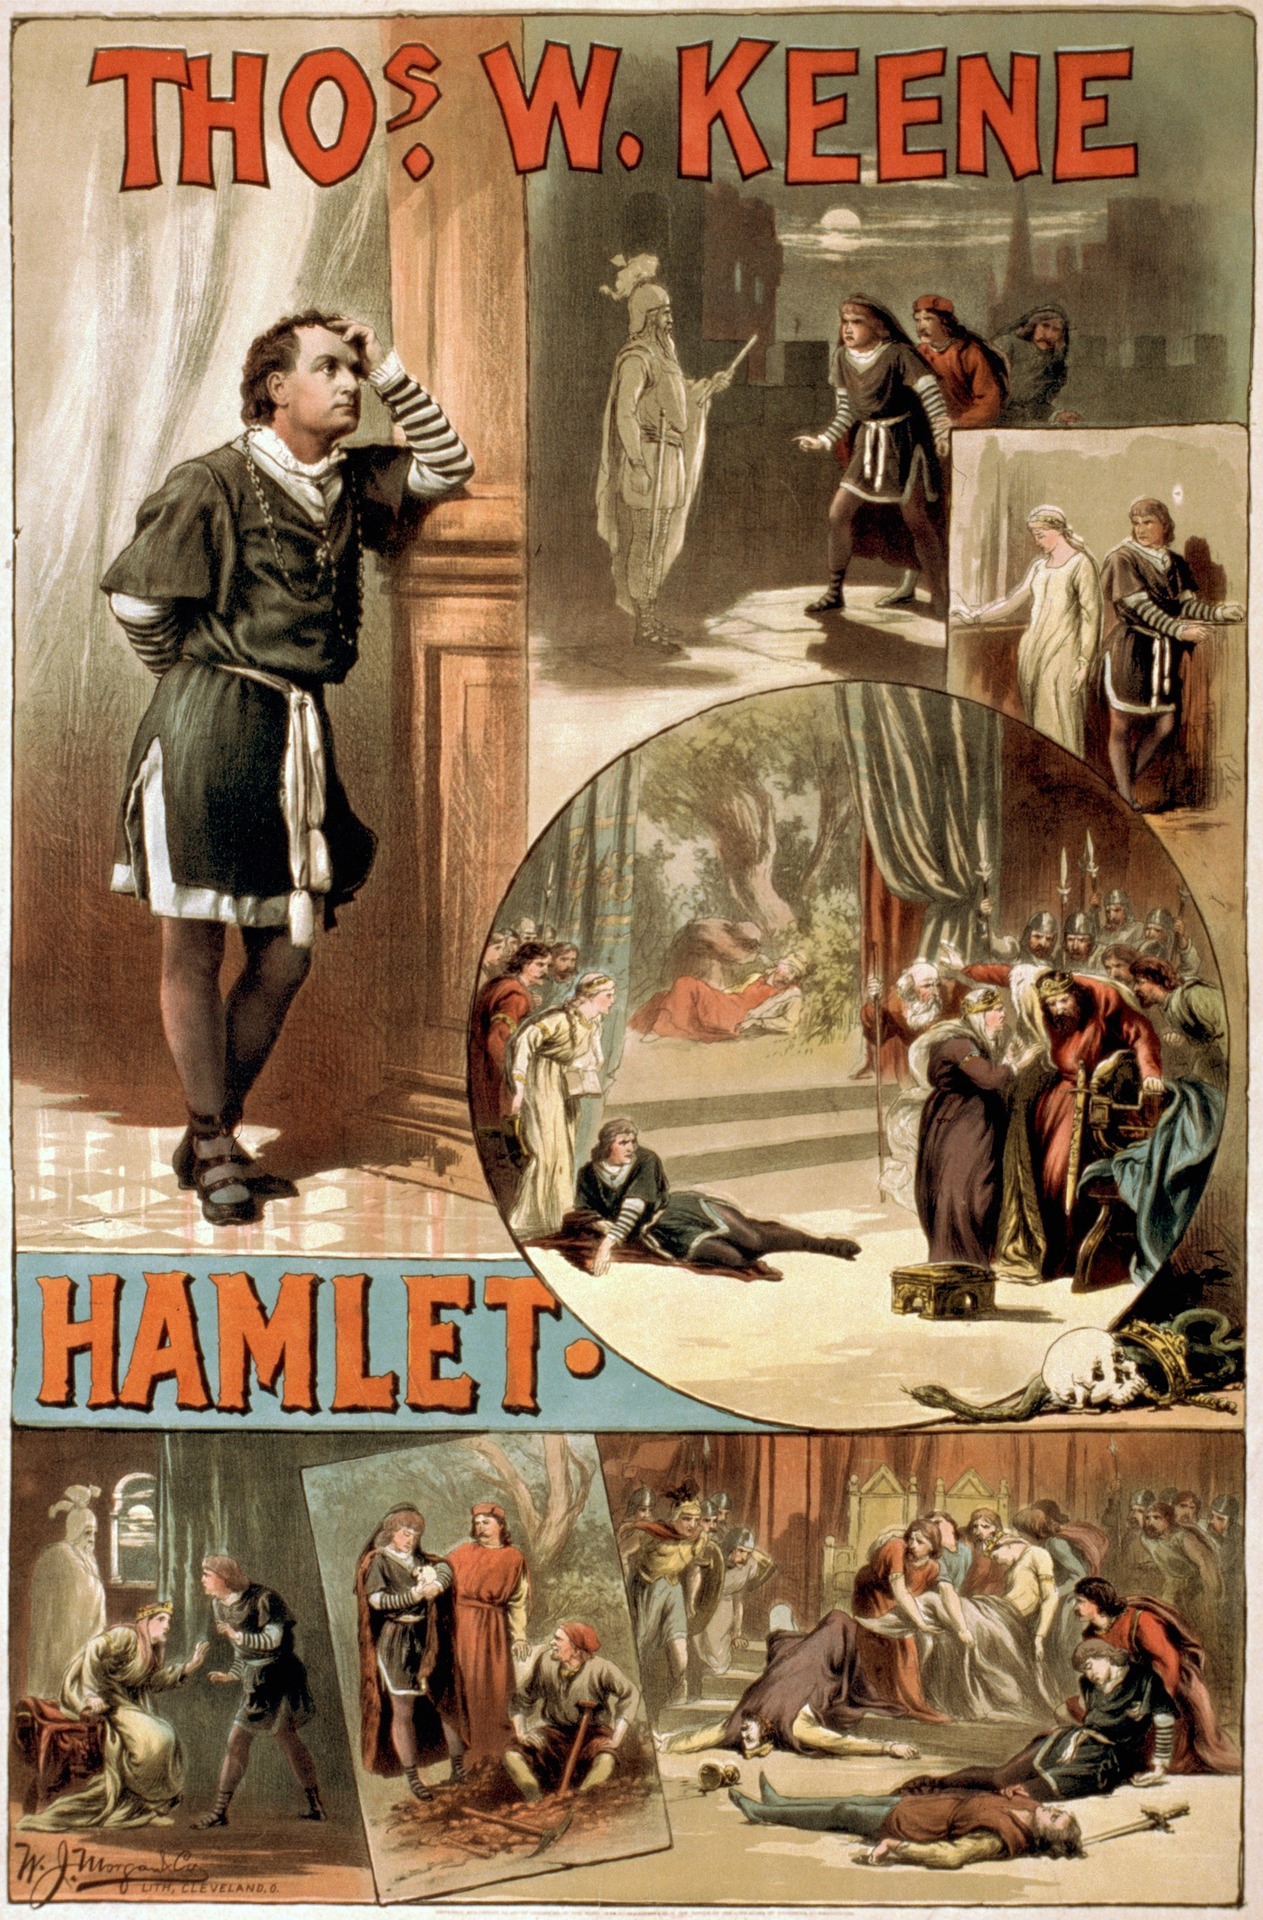 Conflicts of Hamlet, appearance vs reality in Hamlet, political corruption in Hamlet,